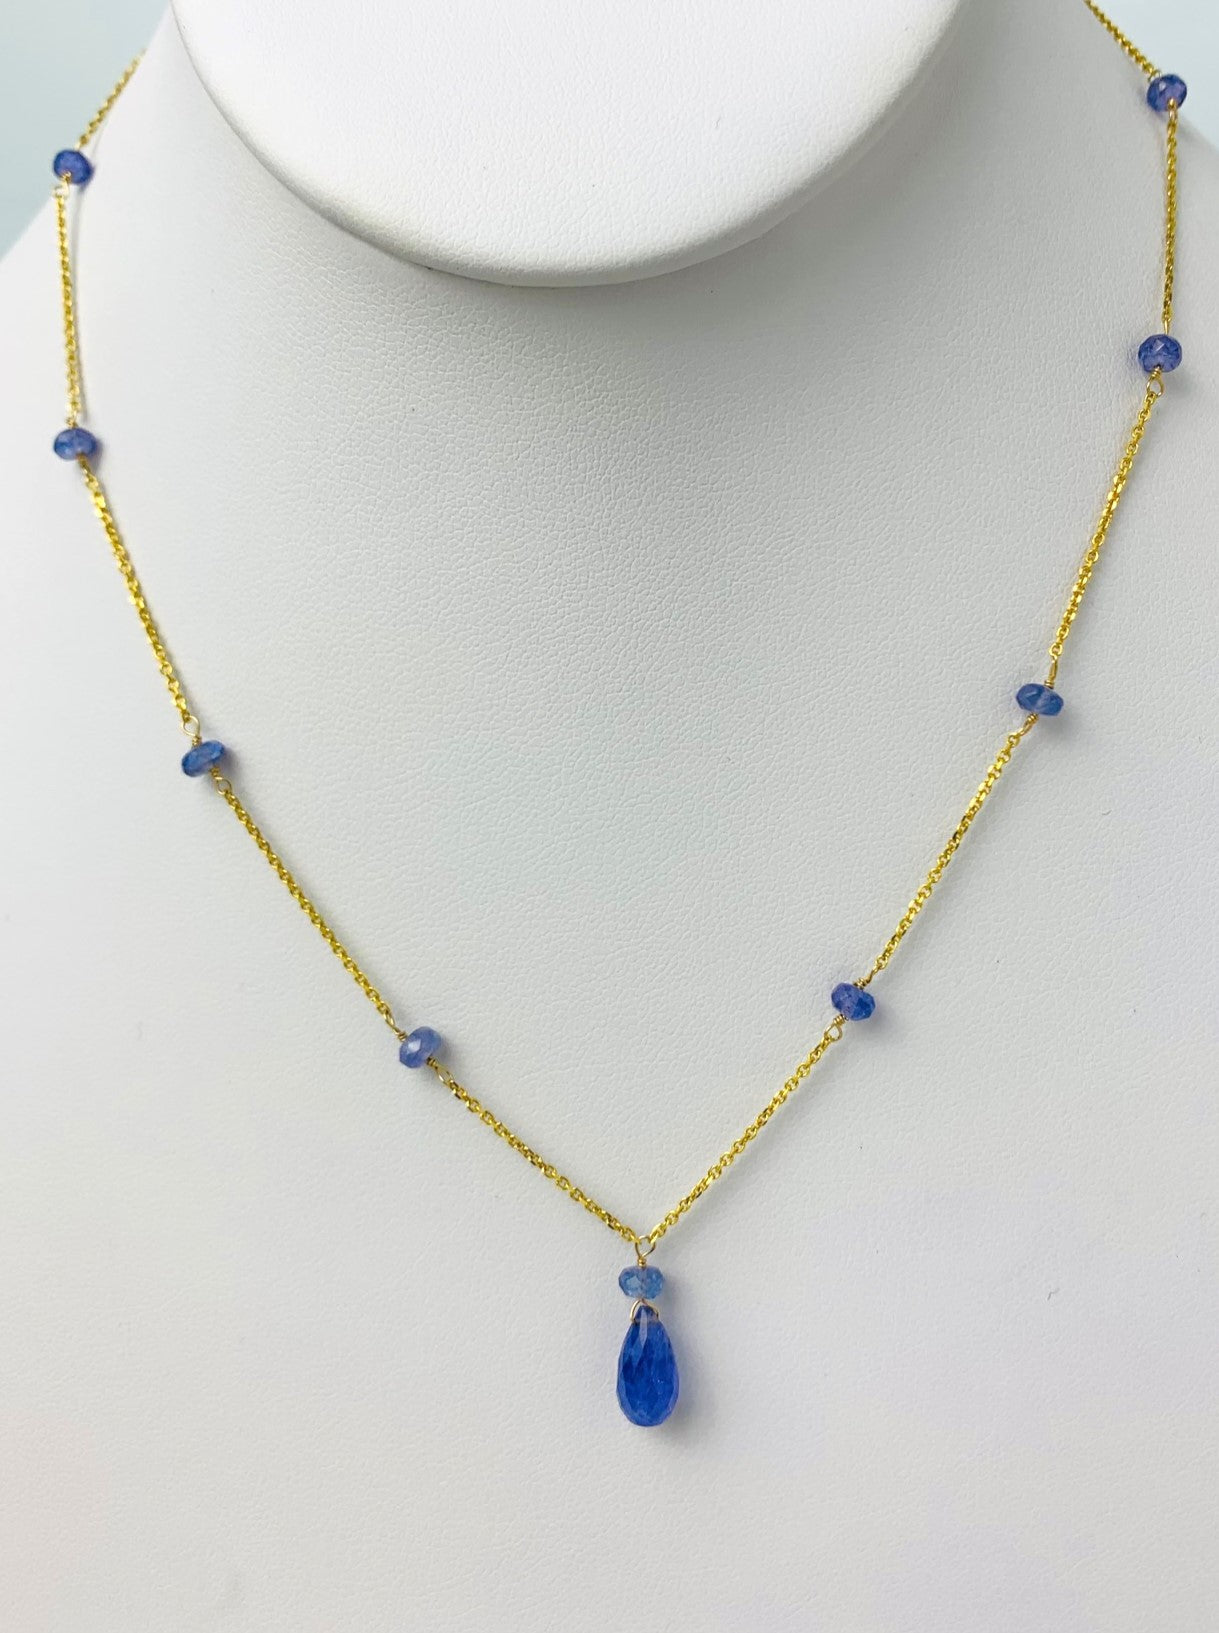 17" Tanzanite Station Necklace With Center Drop in 14KY - NCK-483-DRPGM14Y-TANZ-17